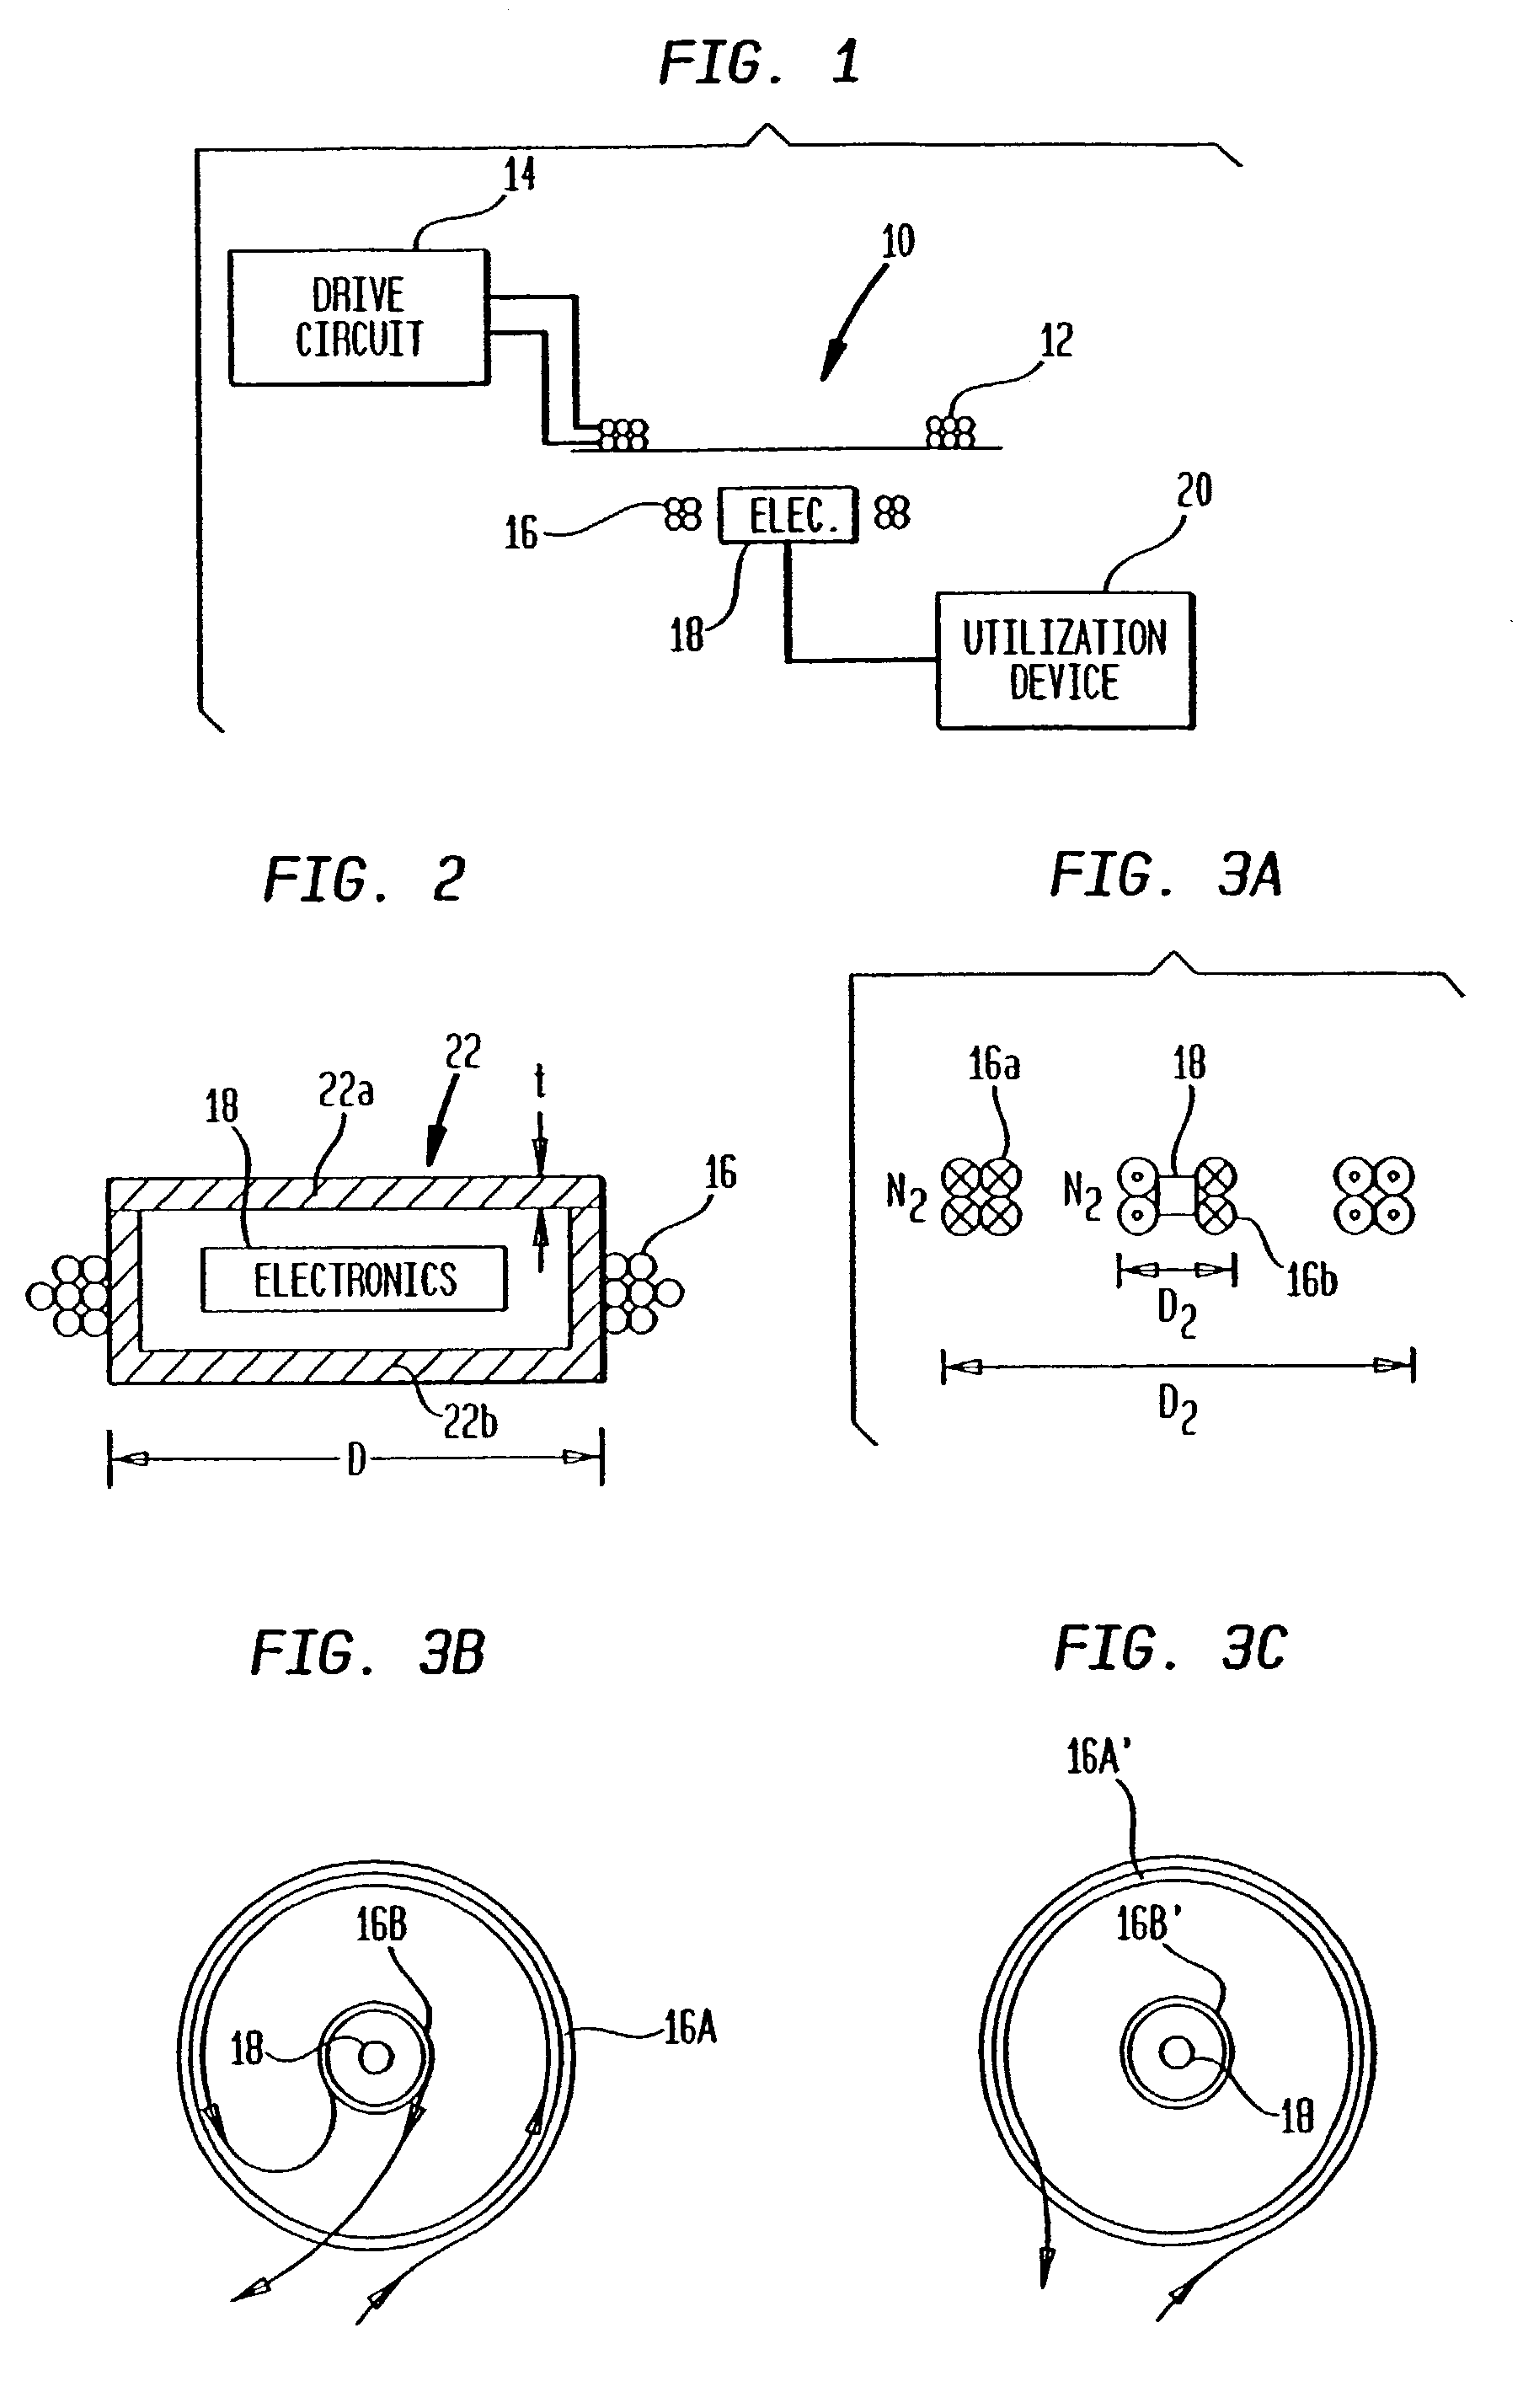 Transcutaneous energy transfer module with integrated conversion circuitry